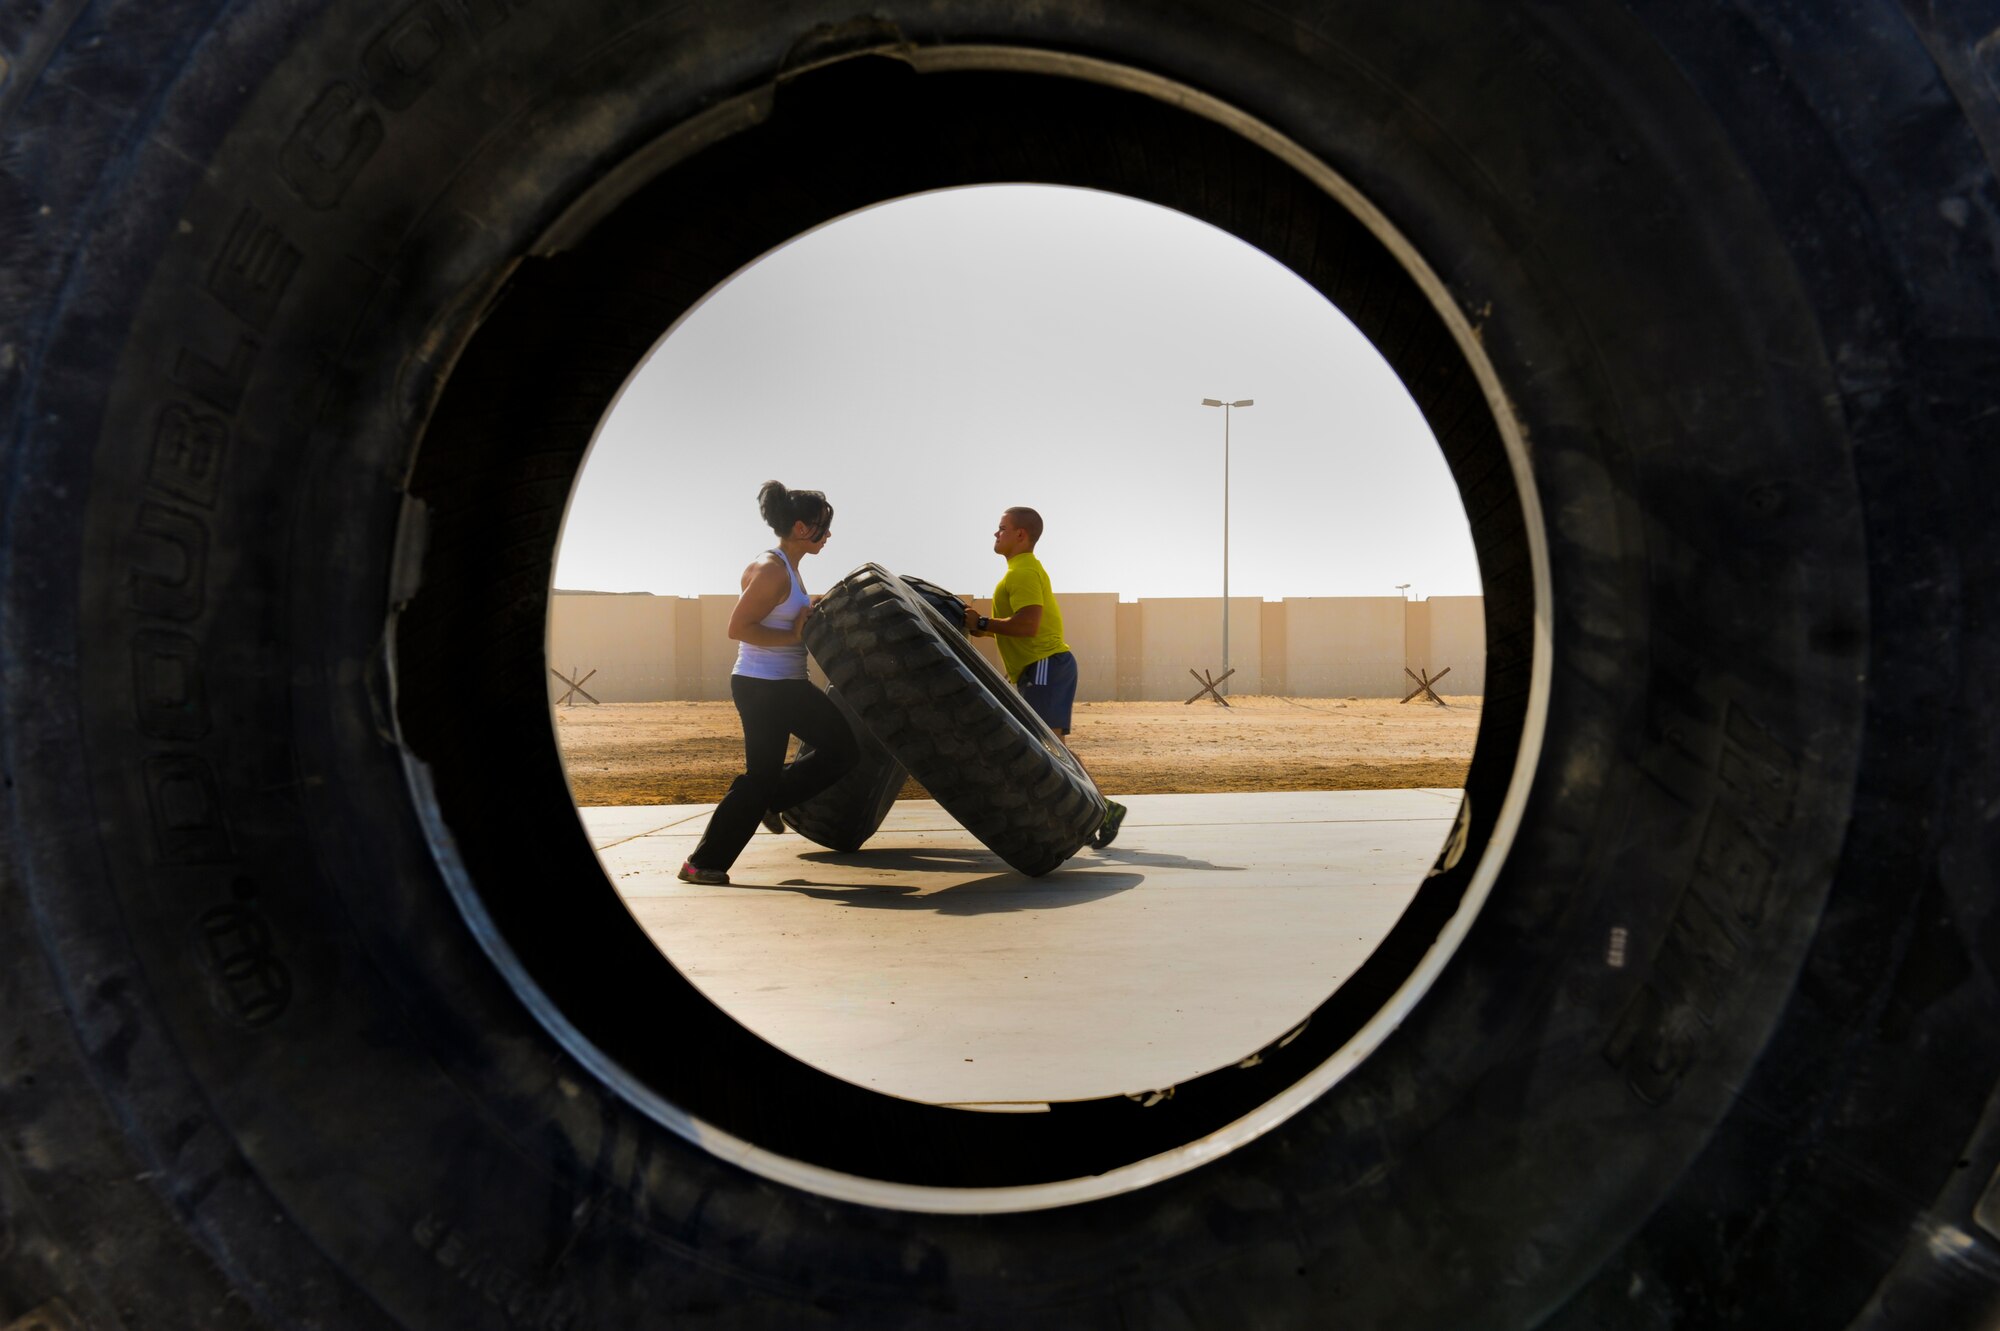 U.S. Air Force Staff Sgt. Vanessa Wyatt and U.S. Air Force Senior Airman Brandon Stout, both from the 380th Expeditionary Civil Engineer Squadron, flip tires at an undisclosed location in Southwest Asia Sept. 11, 2013. Both Wyatt and Stout placed in the Strongest in the AOR competition, Wyatt placing second in the overall woman's category and Stout winning first place. Wyatt is native to Orange, Calif., and is deployed Nellis Air Force Base, Nev. Stout is a native to Holly, Mich., and deployed from Ellsworth, S.D. (U.S. Air Force photo by Staff Sgt. Joshua J. Garcia)